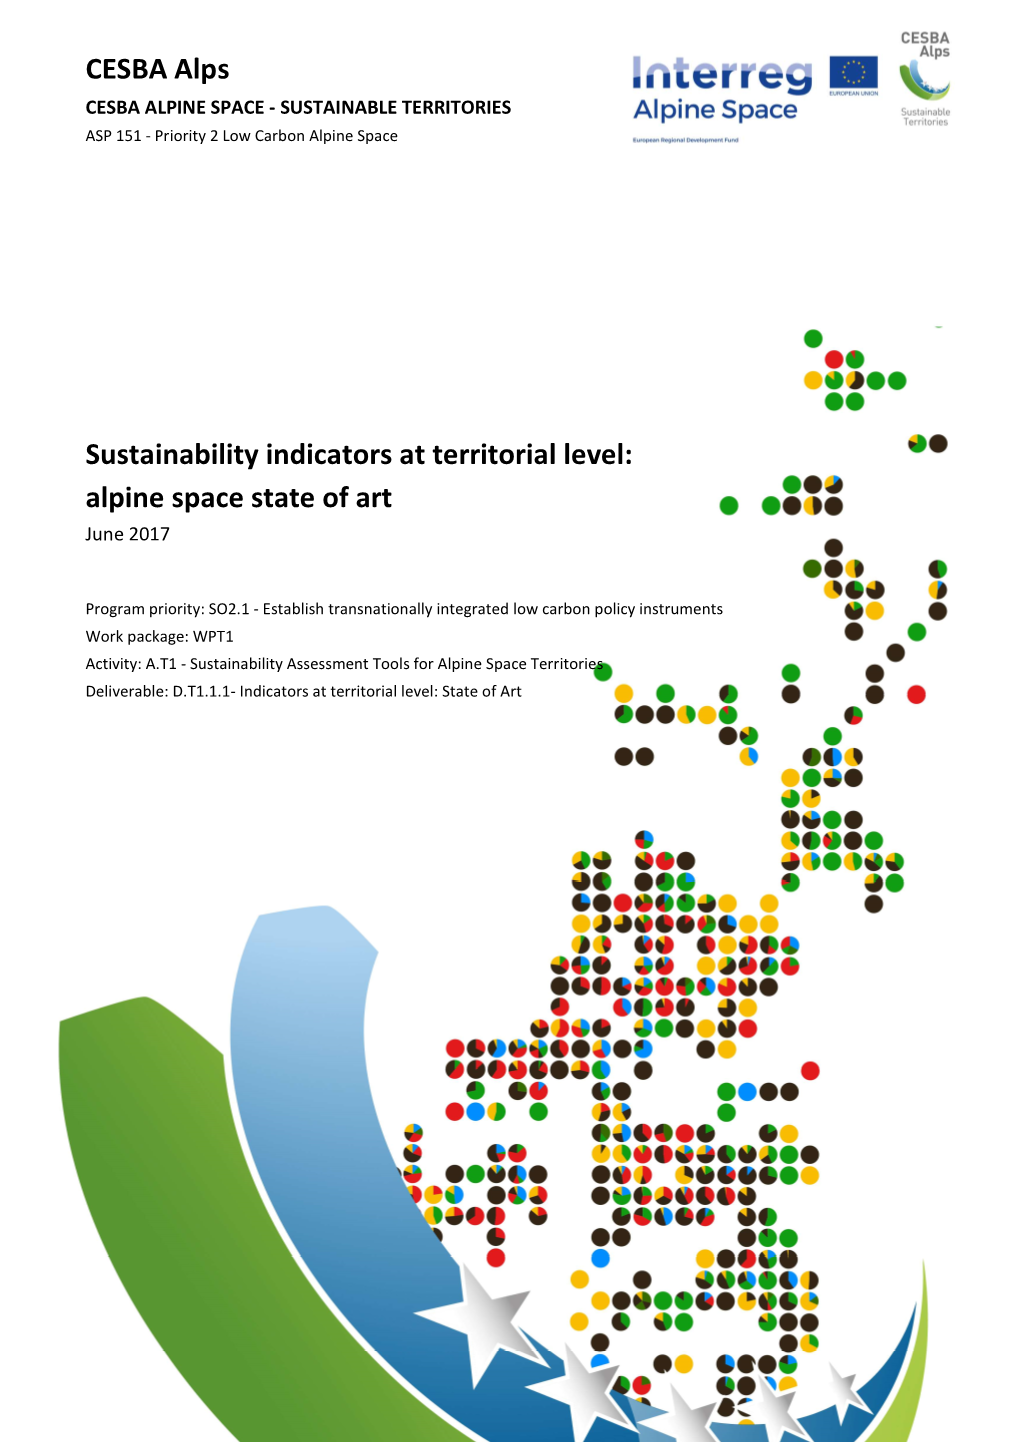 CESBA Alps Sustainability Indicators at Territorial Level: Alpine Space State